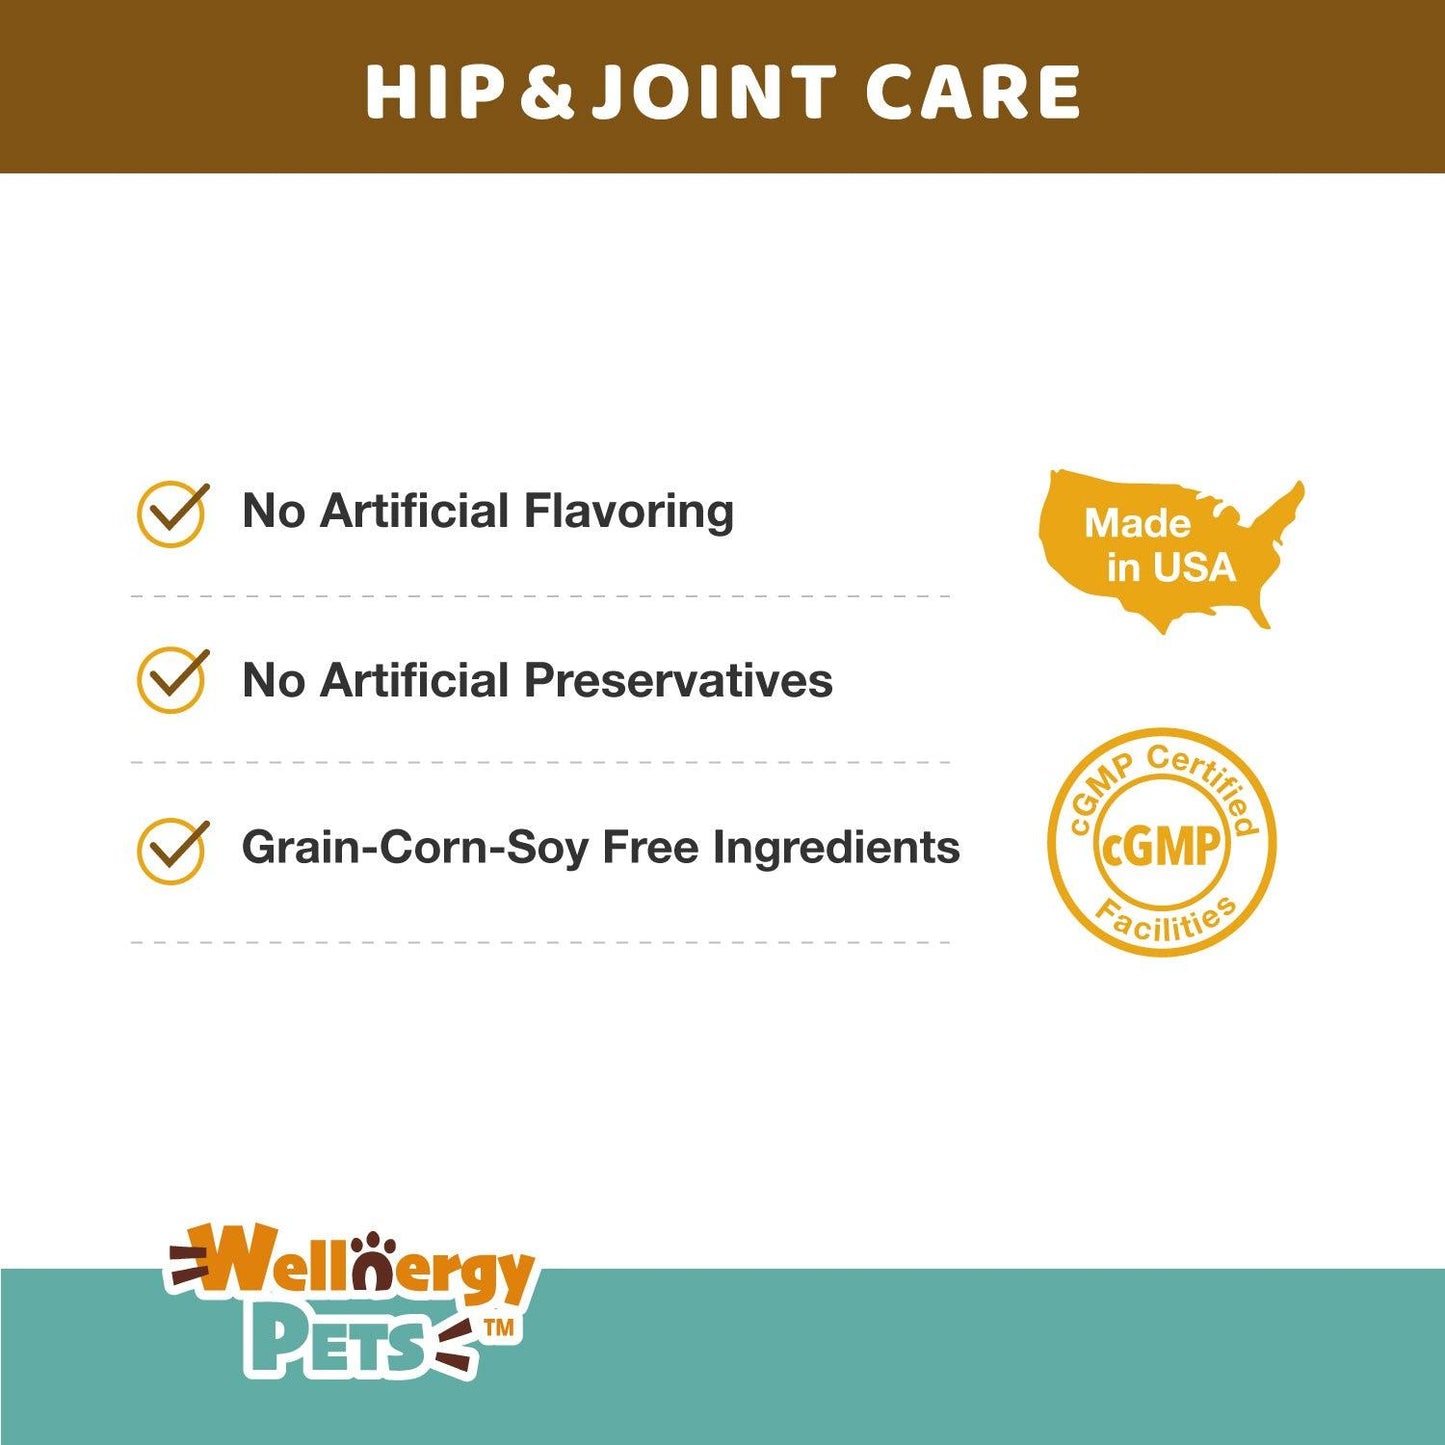 Hip & Joint Care for Dogs and Cats - 60 chews